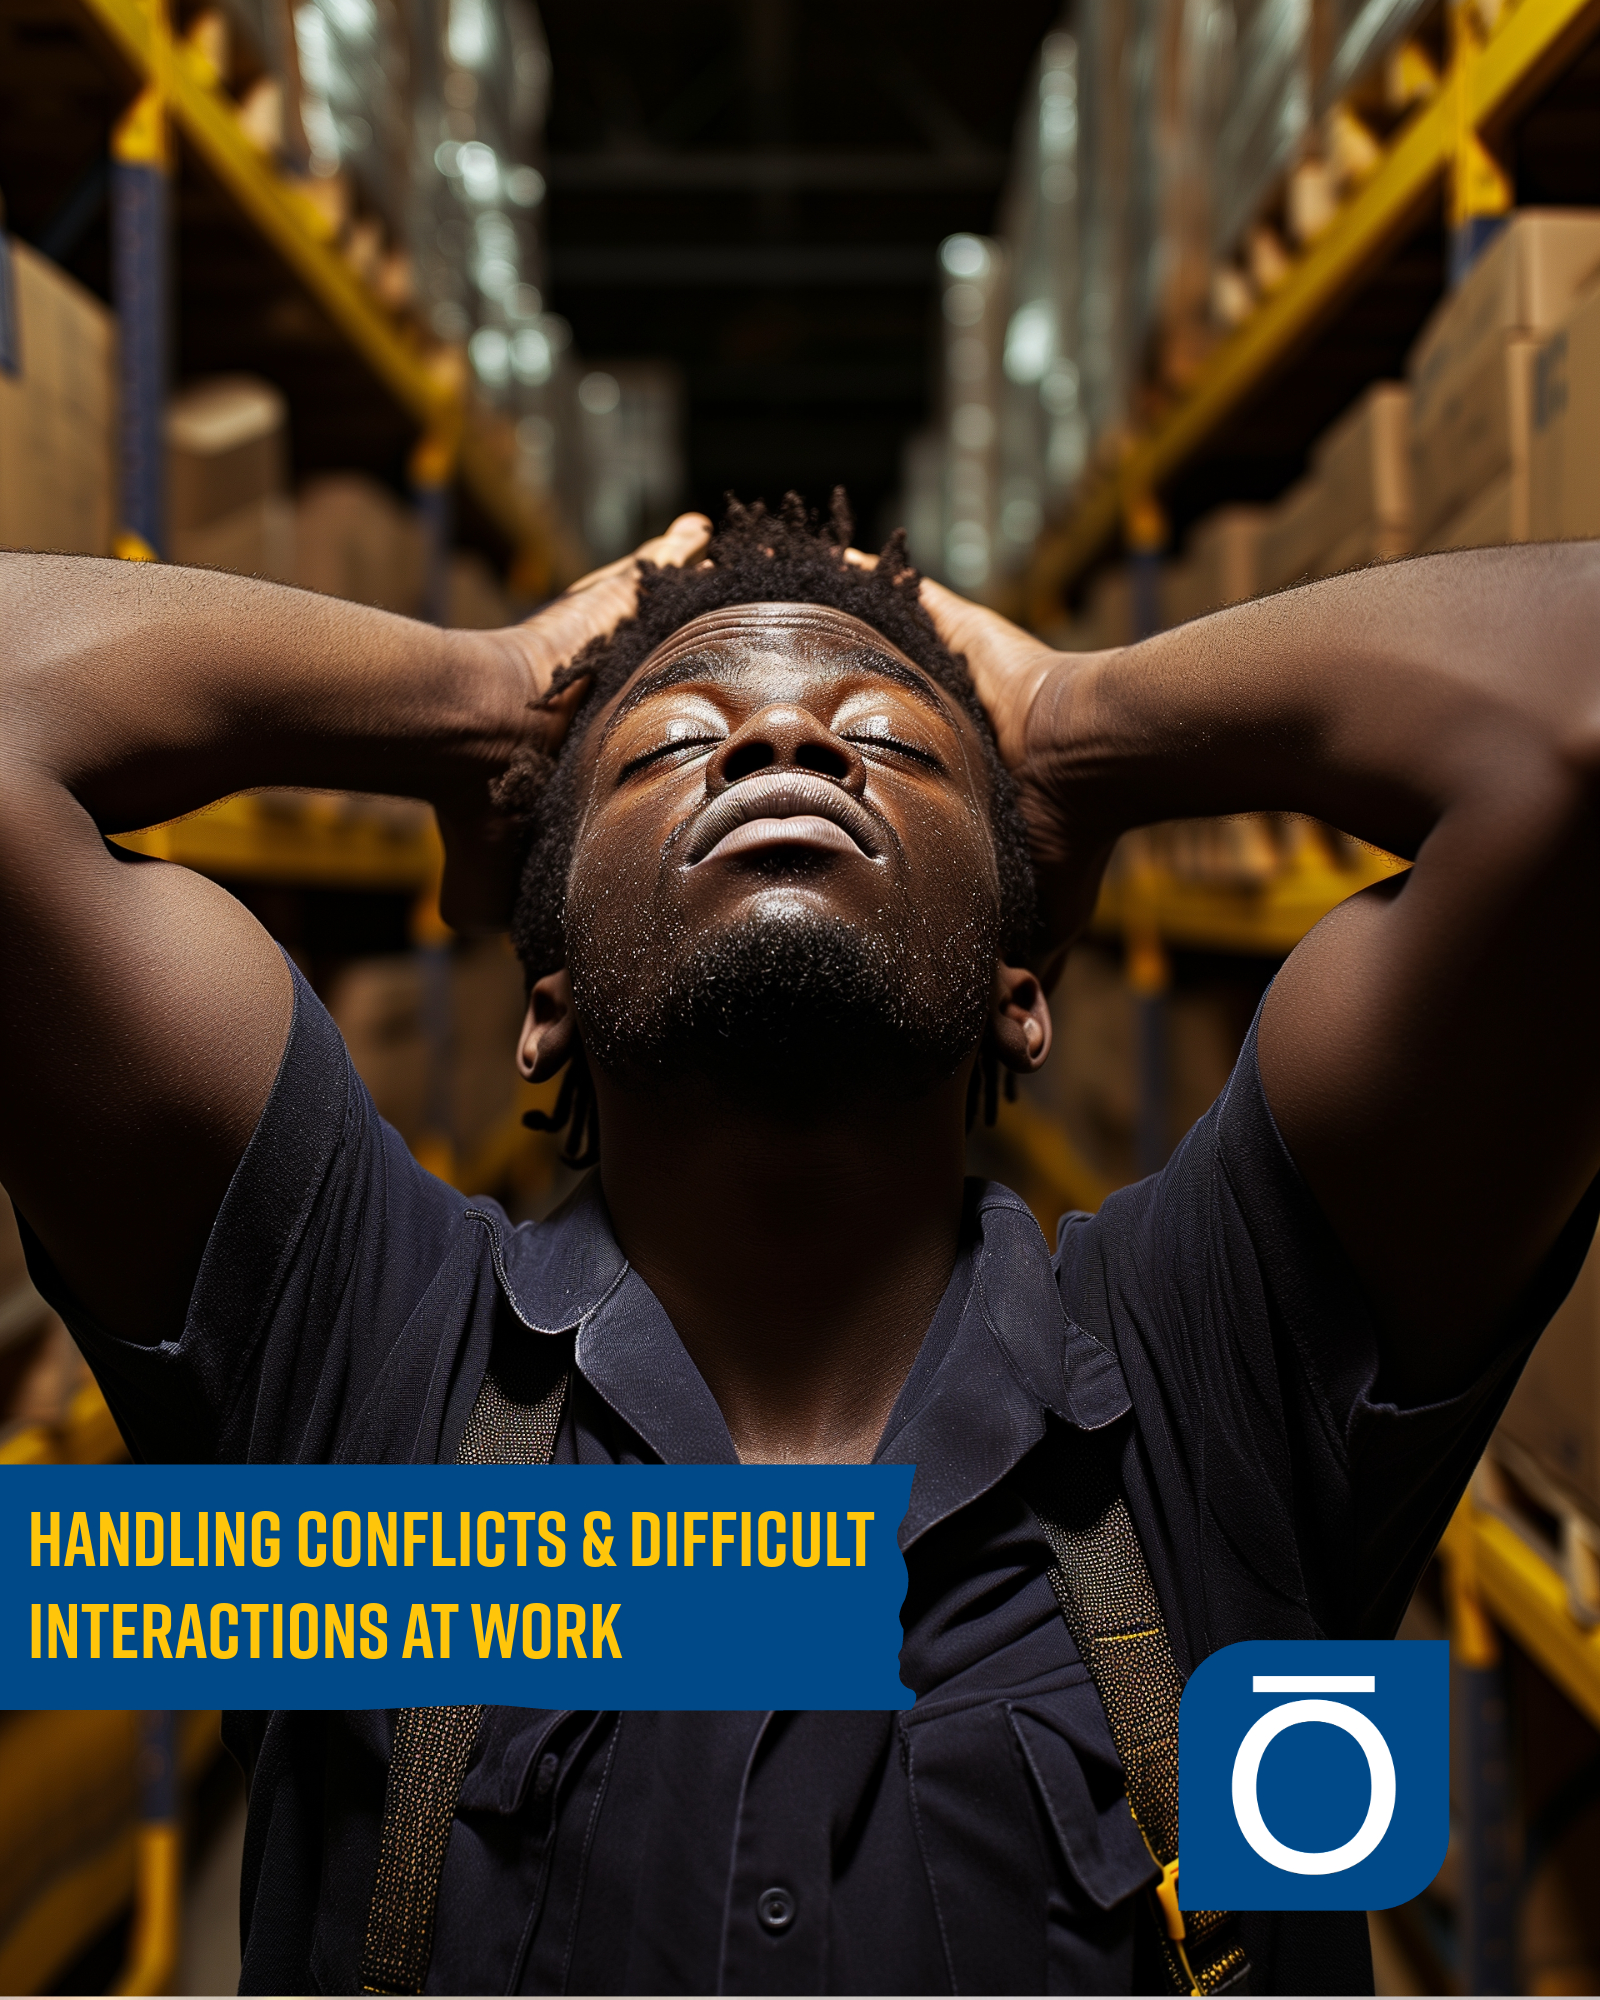 Worker feeling stressed in a warehouse, symbolizing the need for conflict resolution.